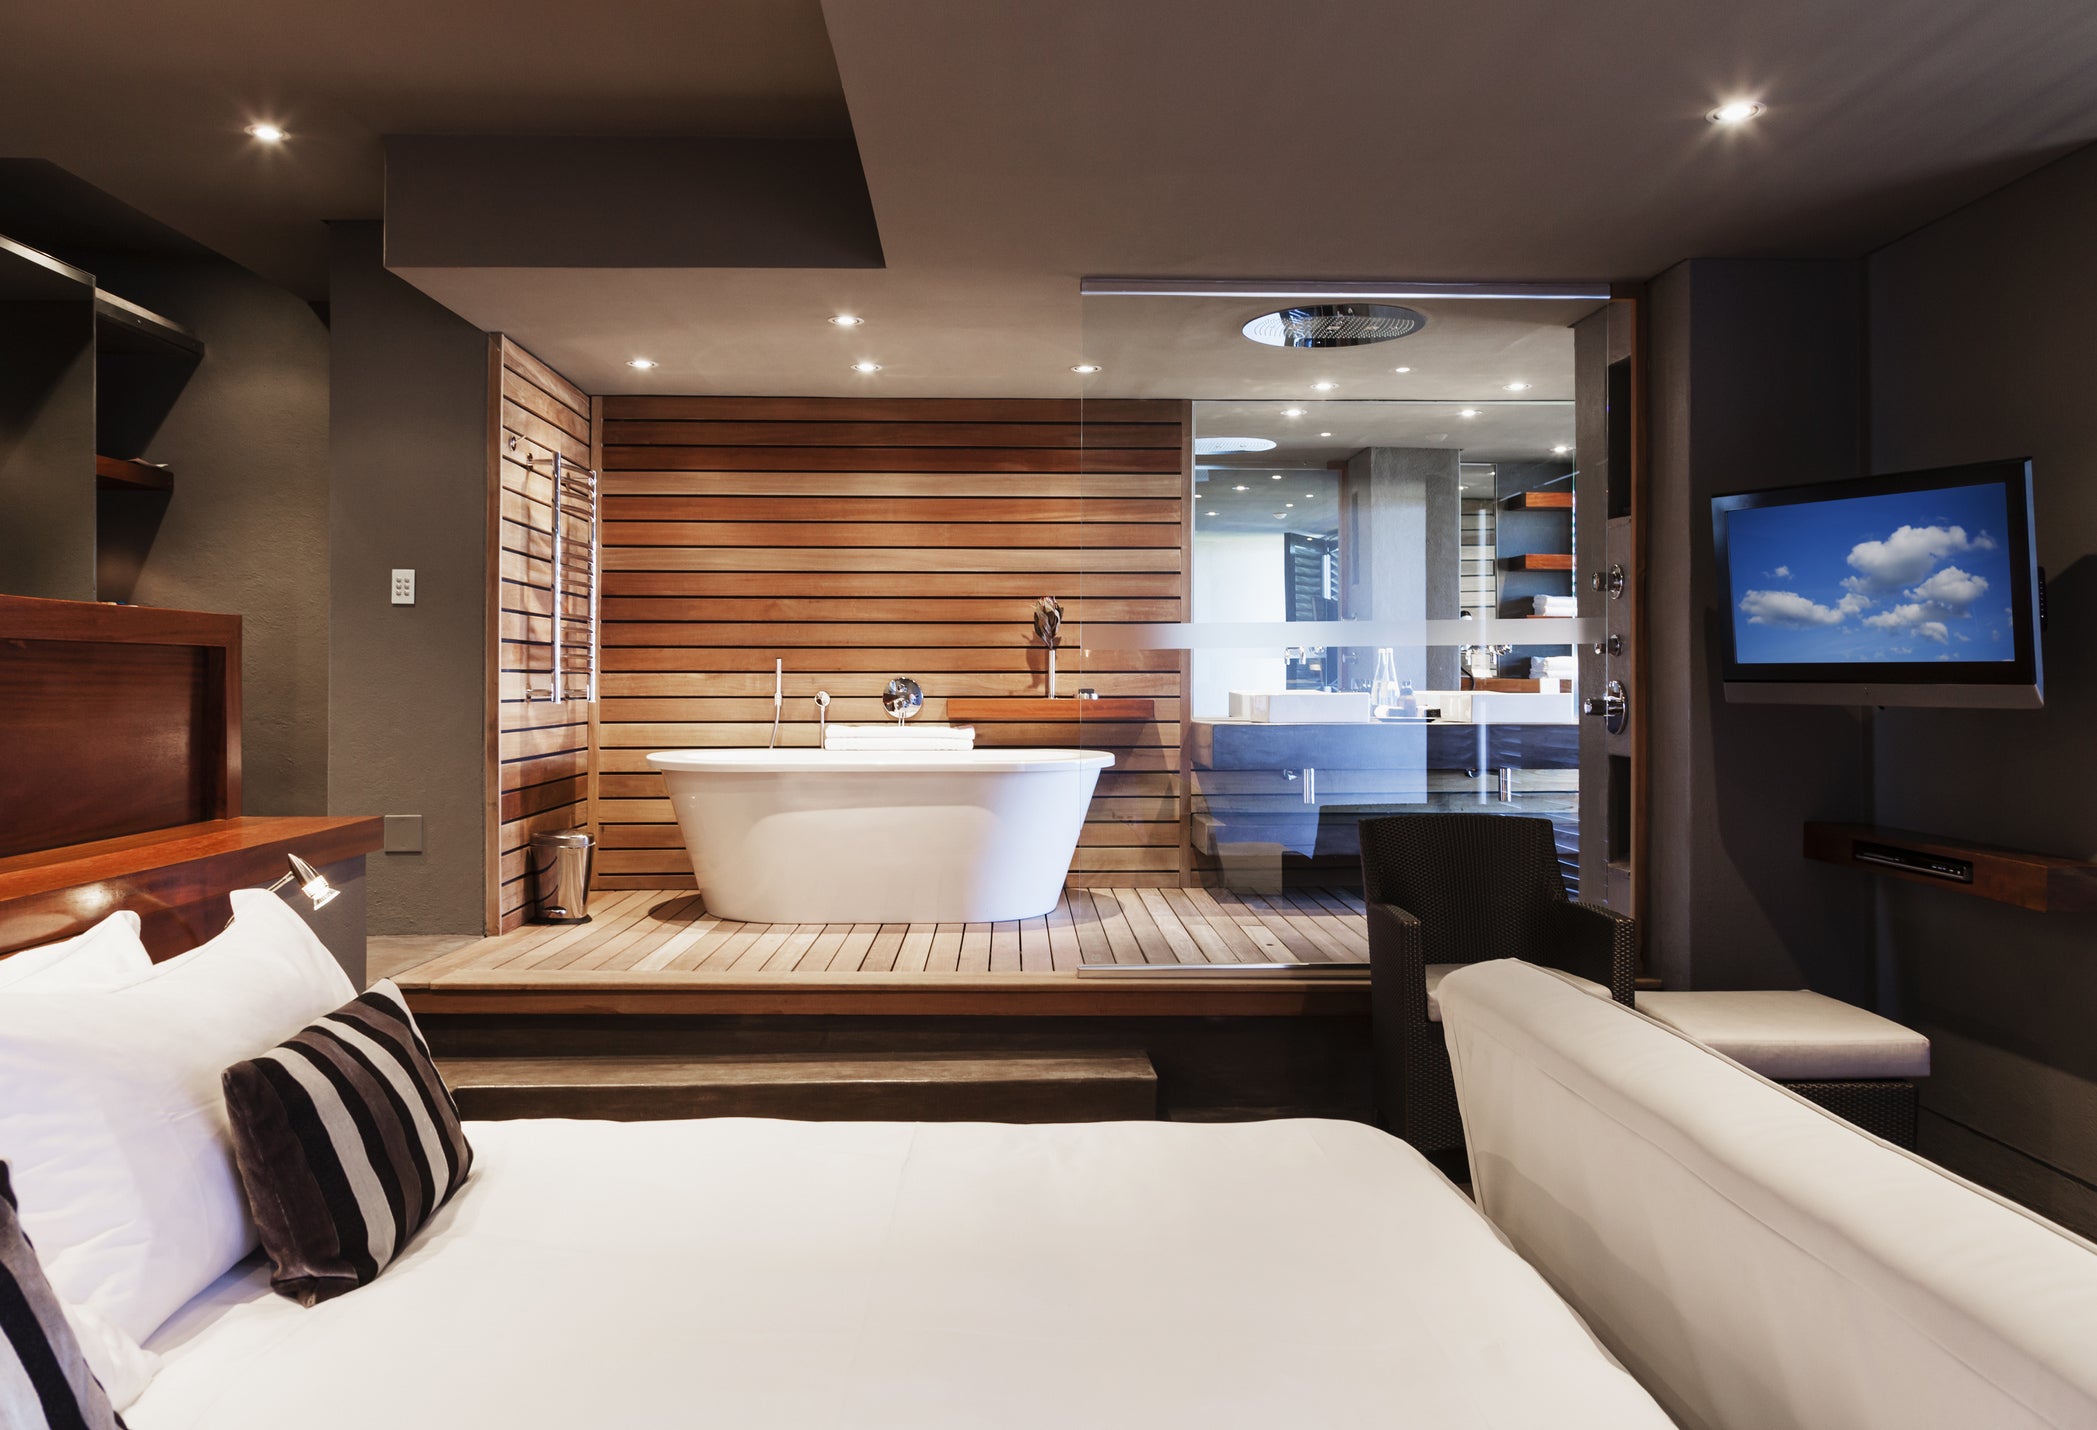 Bed and bathtub in modern master bedroom